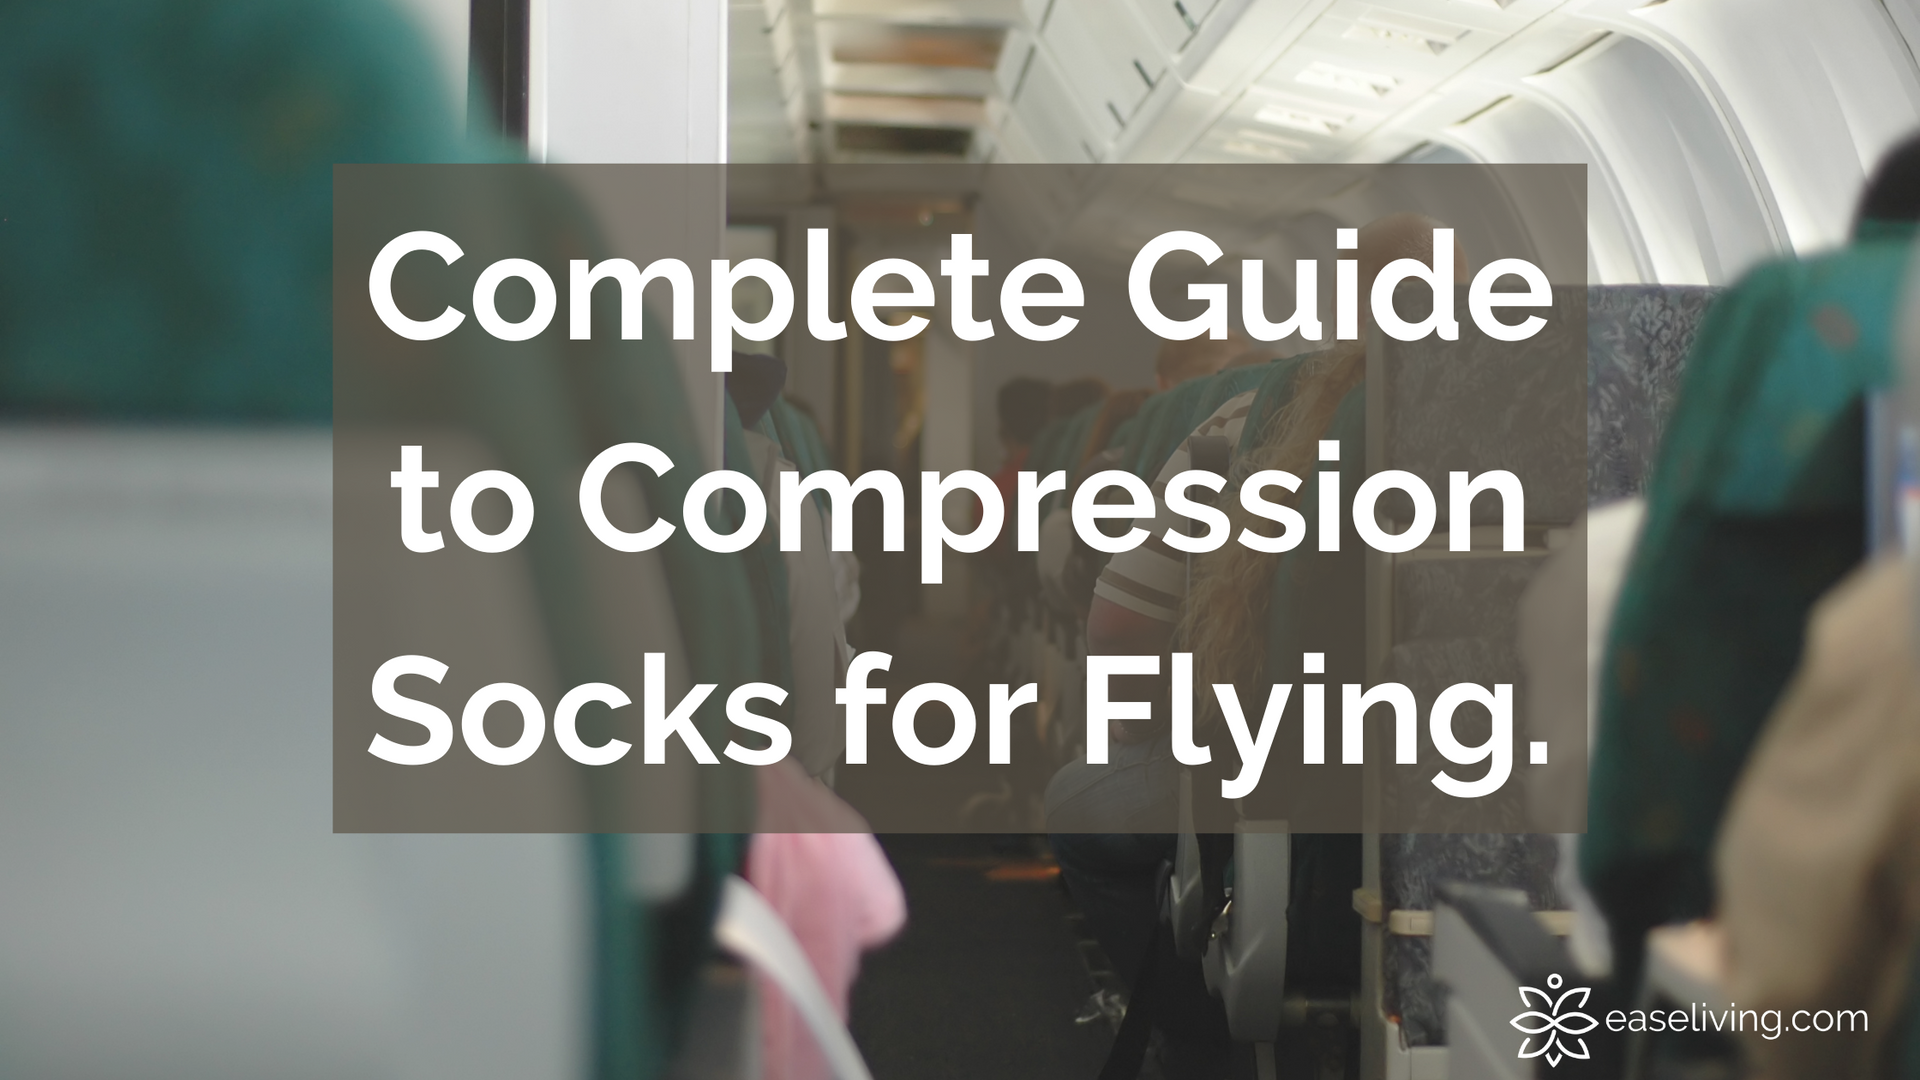 Complete Guide to Compression Socks for Flying